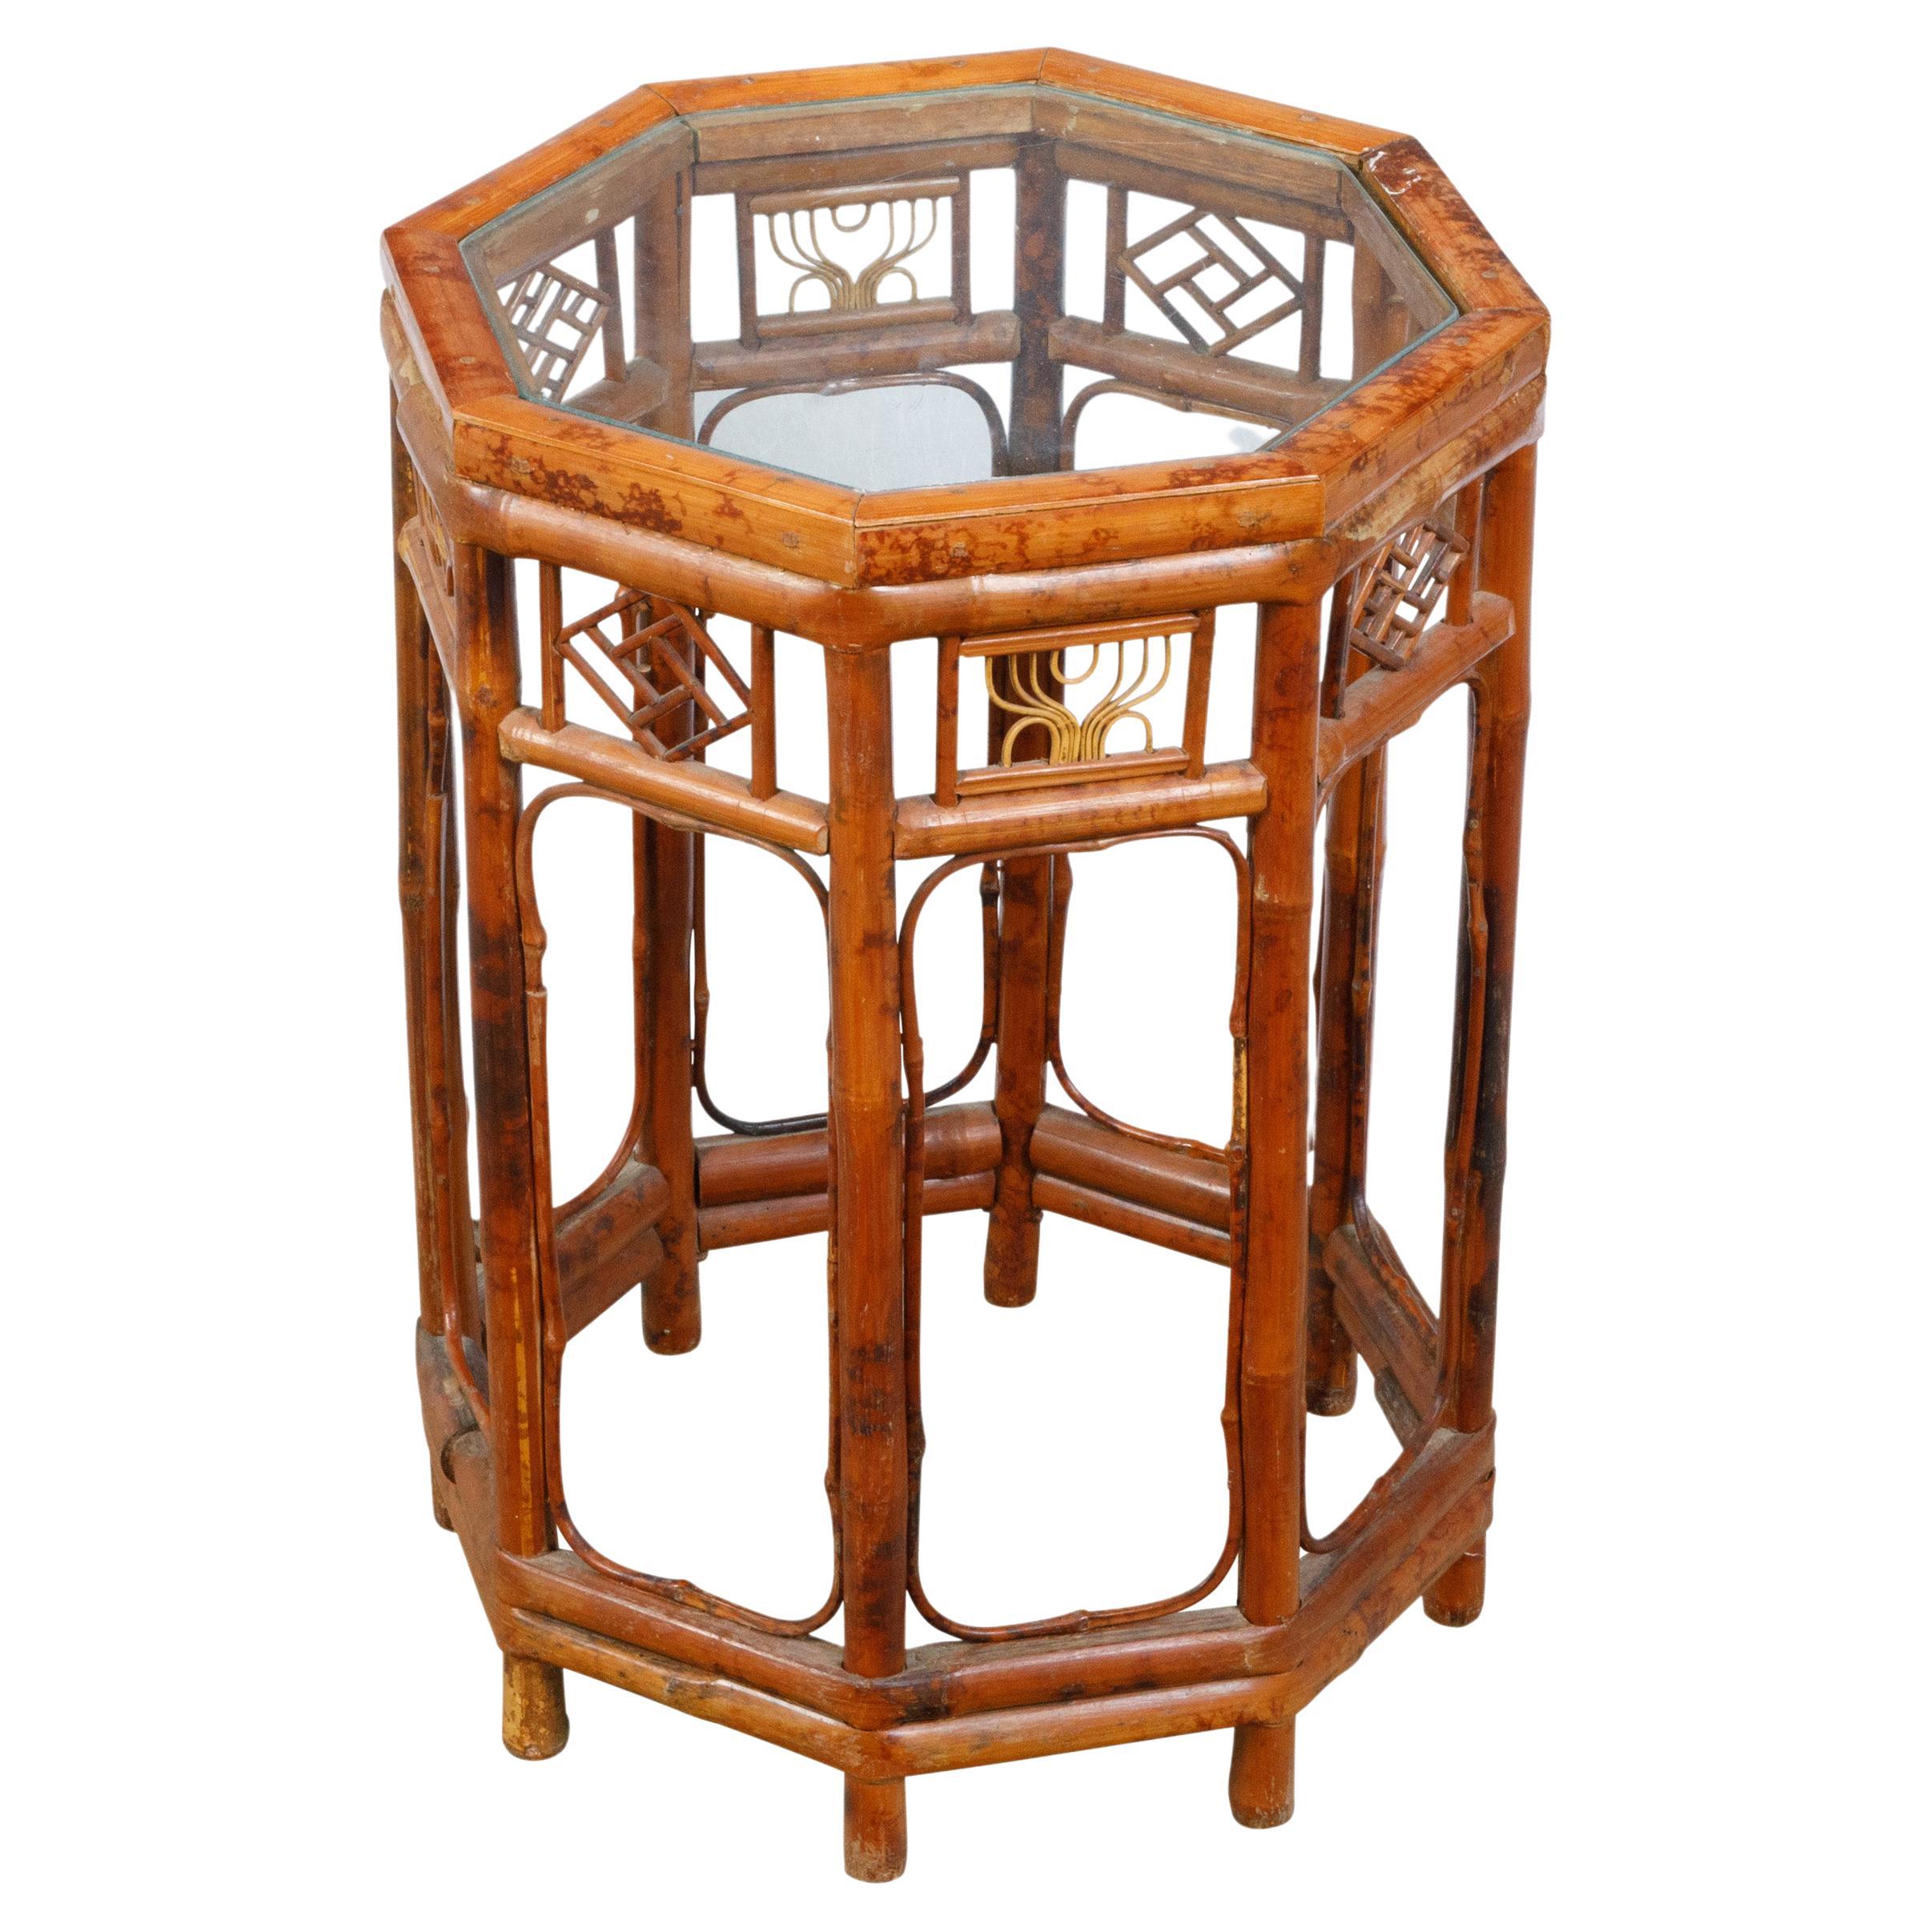 Midcentury Octagonal Bamboo Side Table with Glass Top and Geometric Motifs For Sale